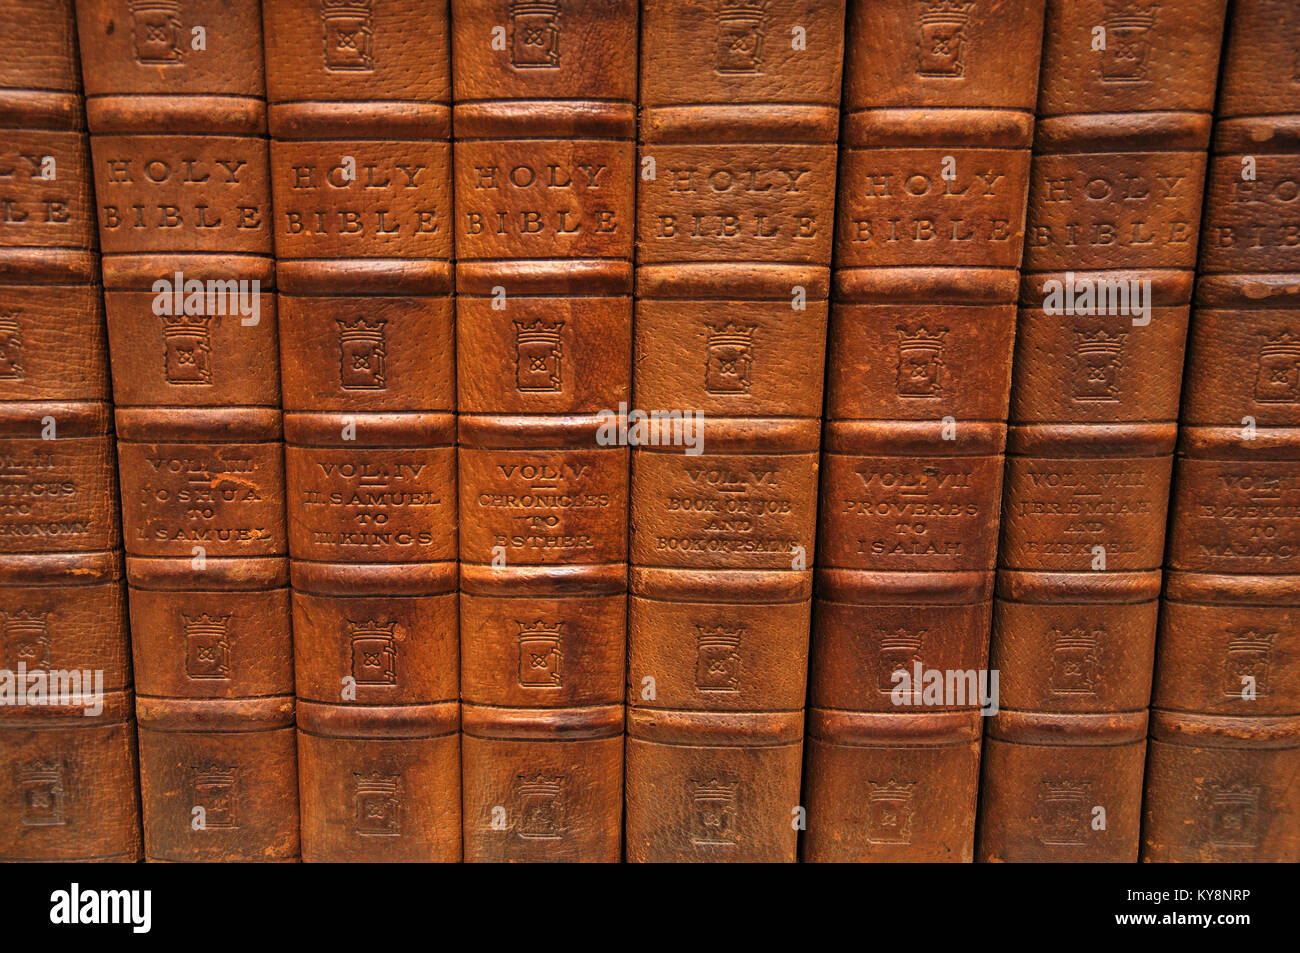 Row of spines from several volumes of the Holy Bible. From the Reed Rare Books Collection in Dunedin, New Zealand. Stock Photo